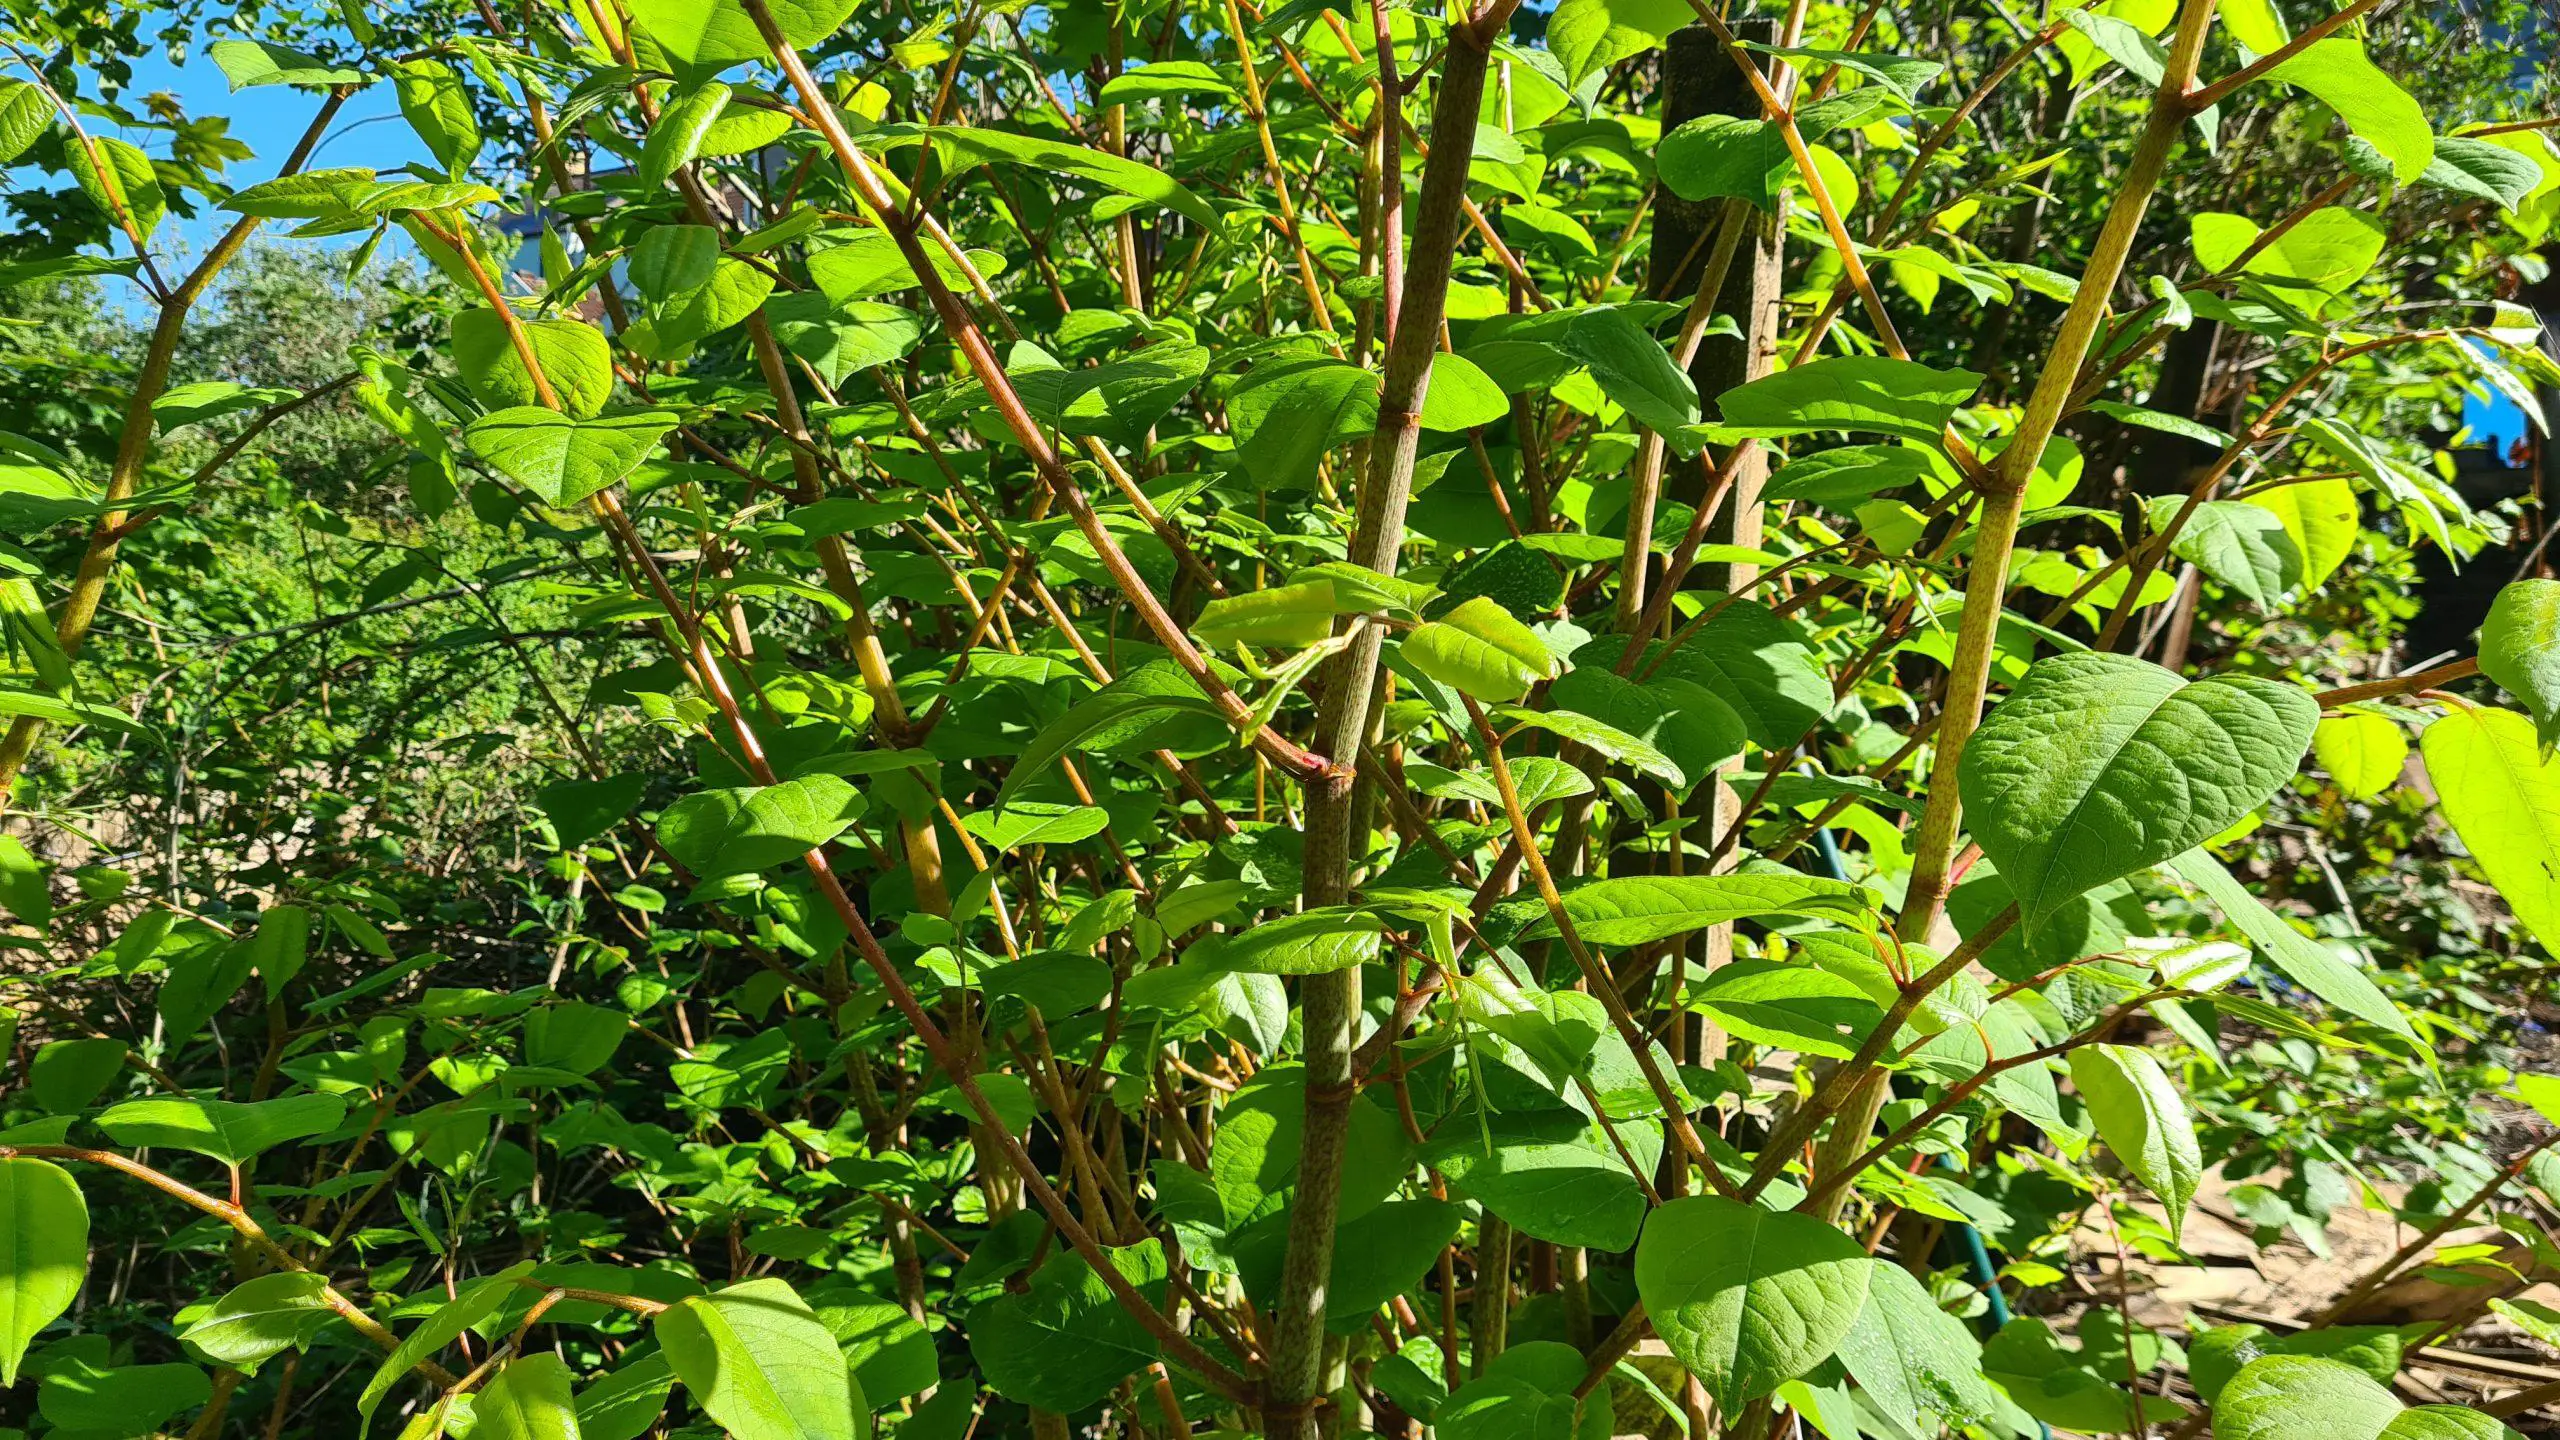 Selecting the best method to remove Japanese knotweed is essential to control the eradication of this invasive plant